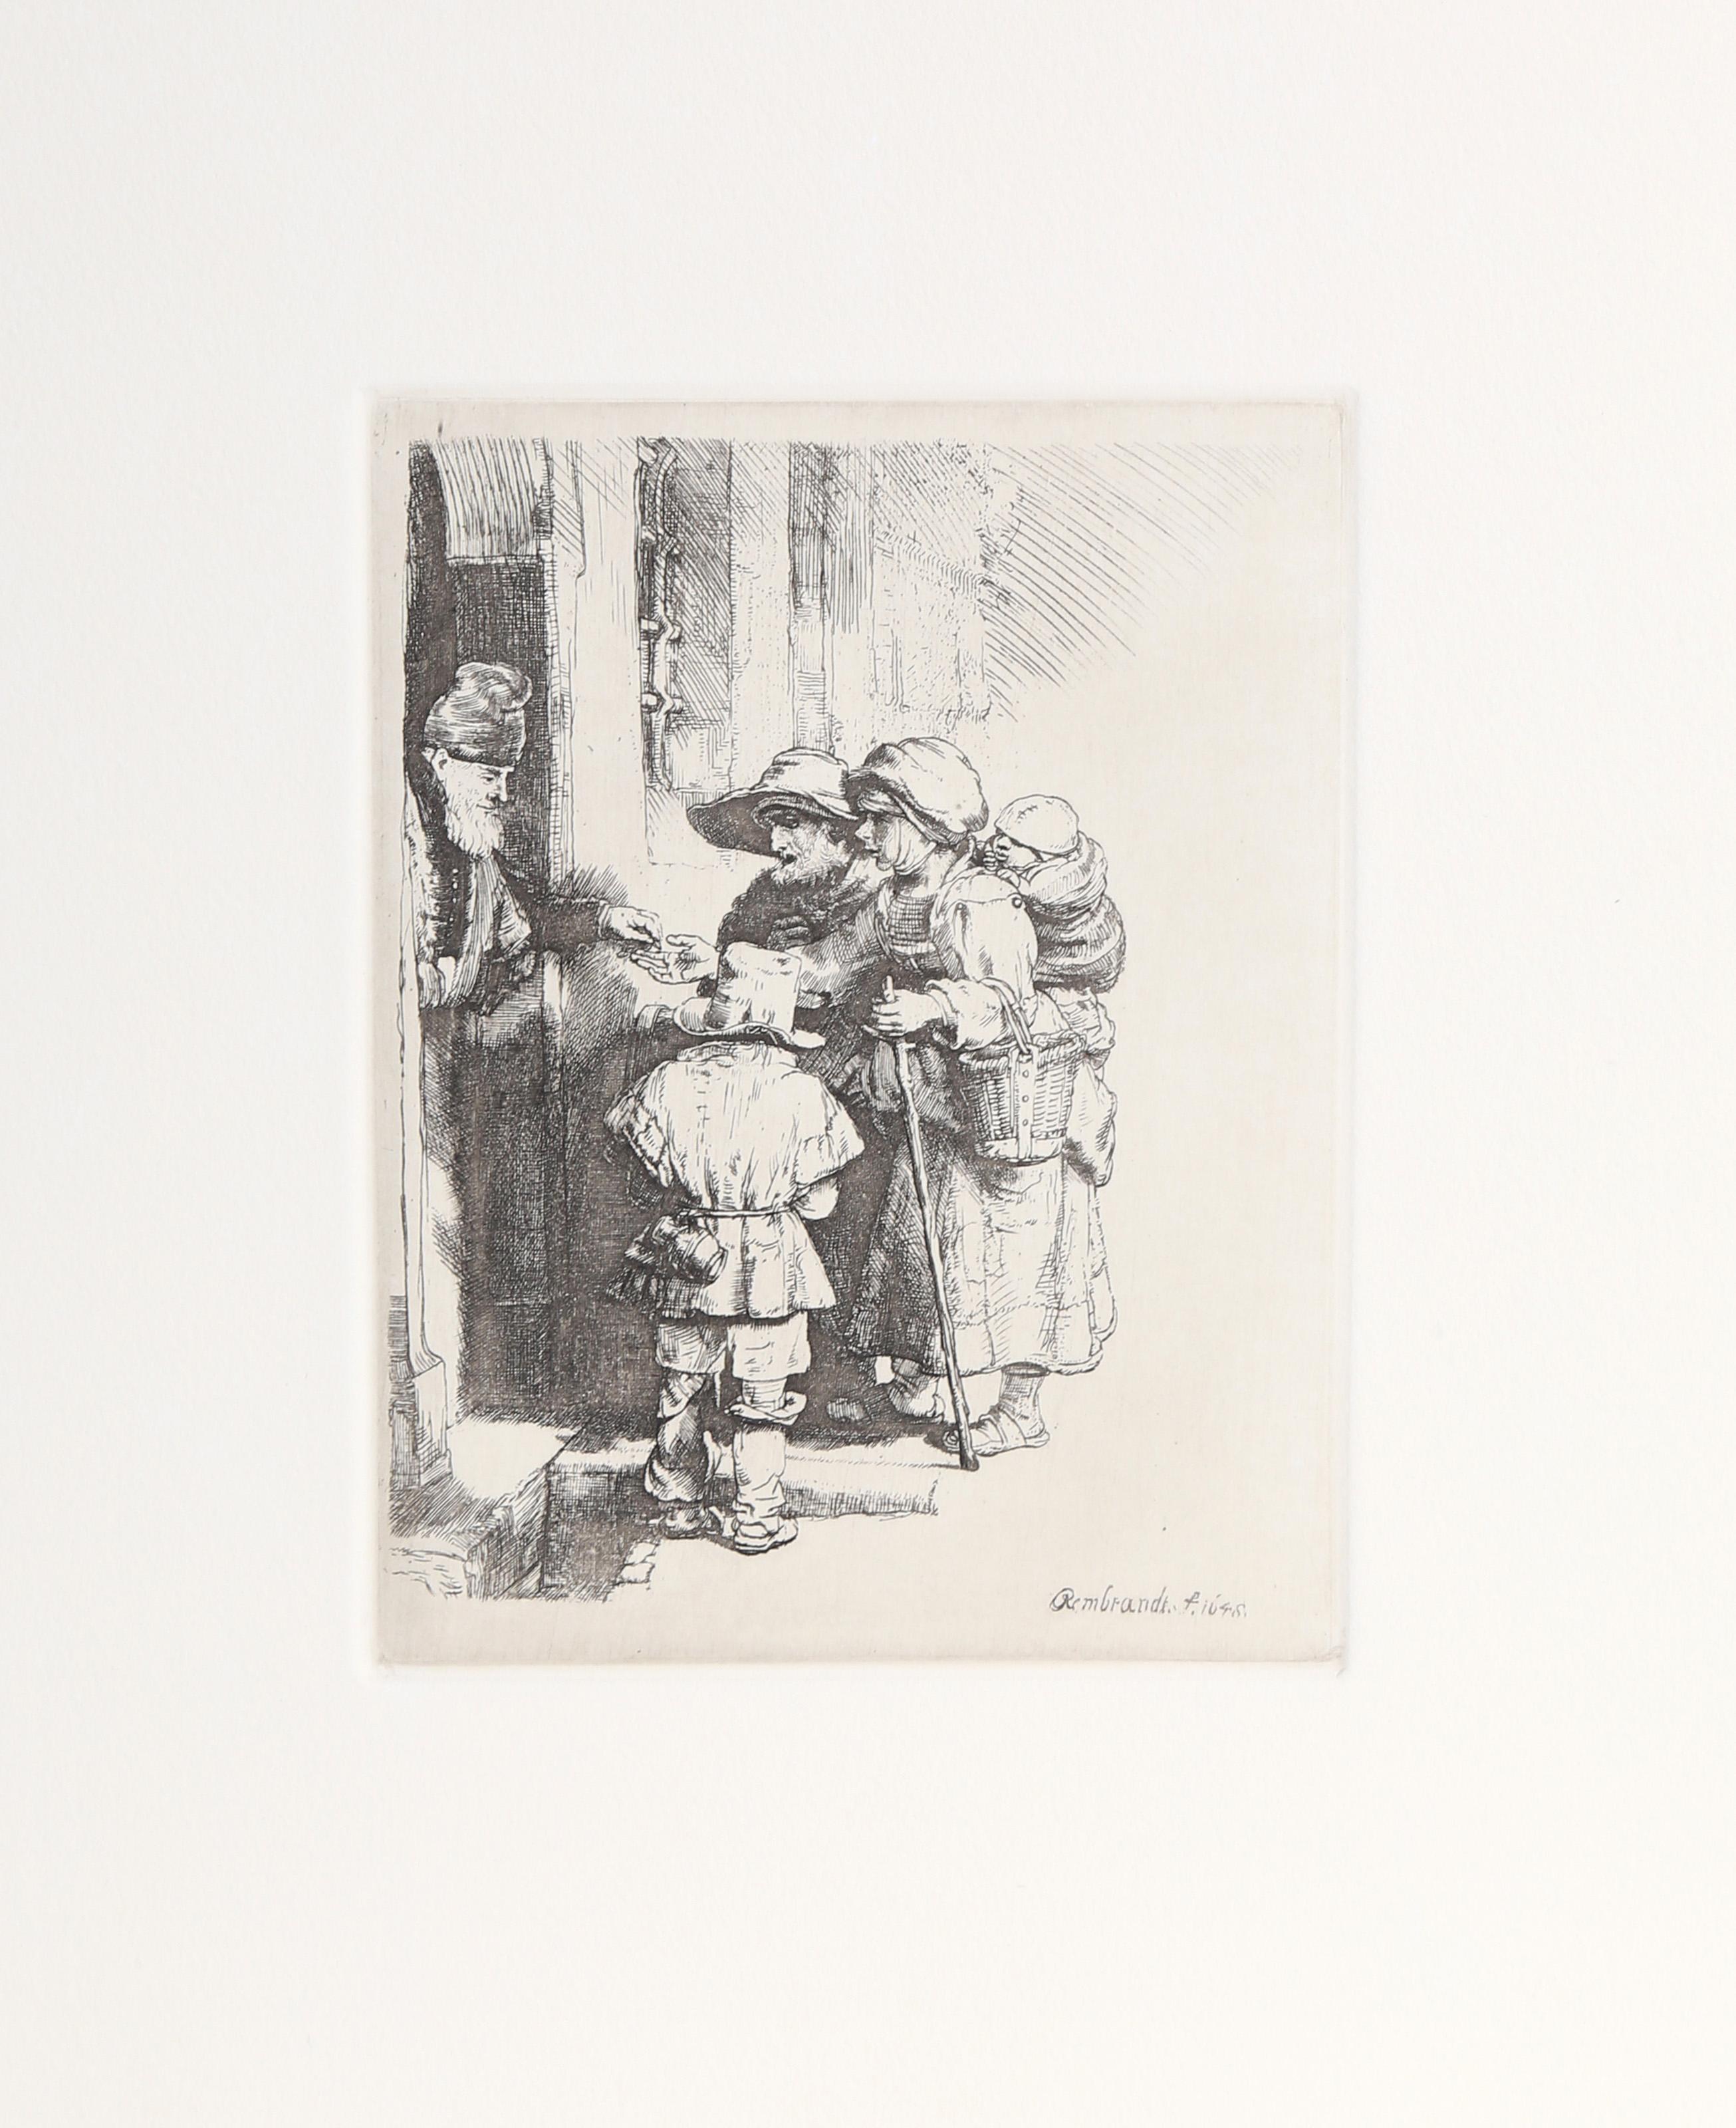  Rembrandt van Rijn, After by Amand Durand, Dutch (1606 - 1669) - Beggars receiving Alms at the Door of a House, Year: of Original: 1648, Medium: Etching, Image Size: 7.5 x 5.5 inches, Size: 15  x 11 in. (38.1  x 27.94 cm), Printer: Amand Durand,